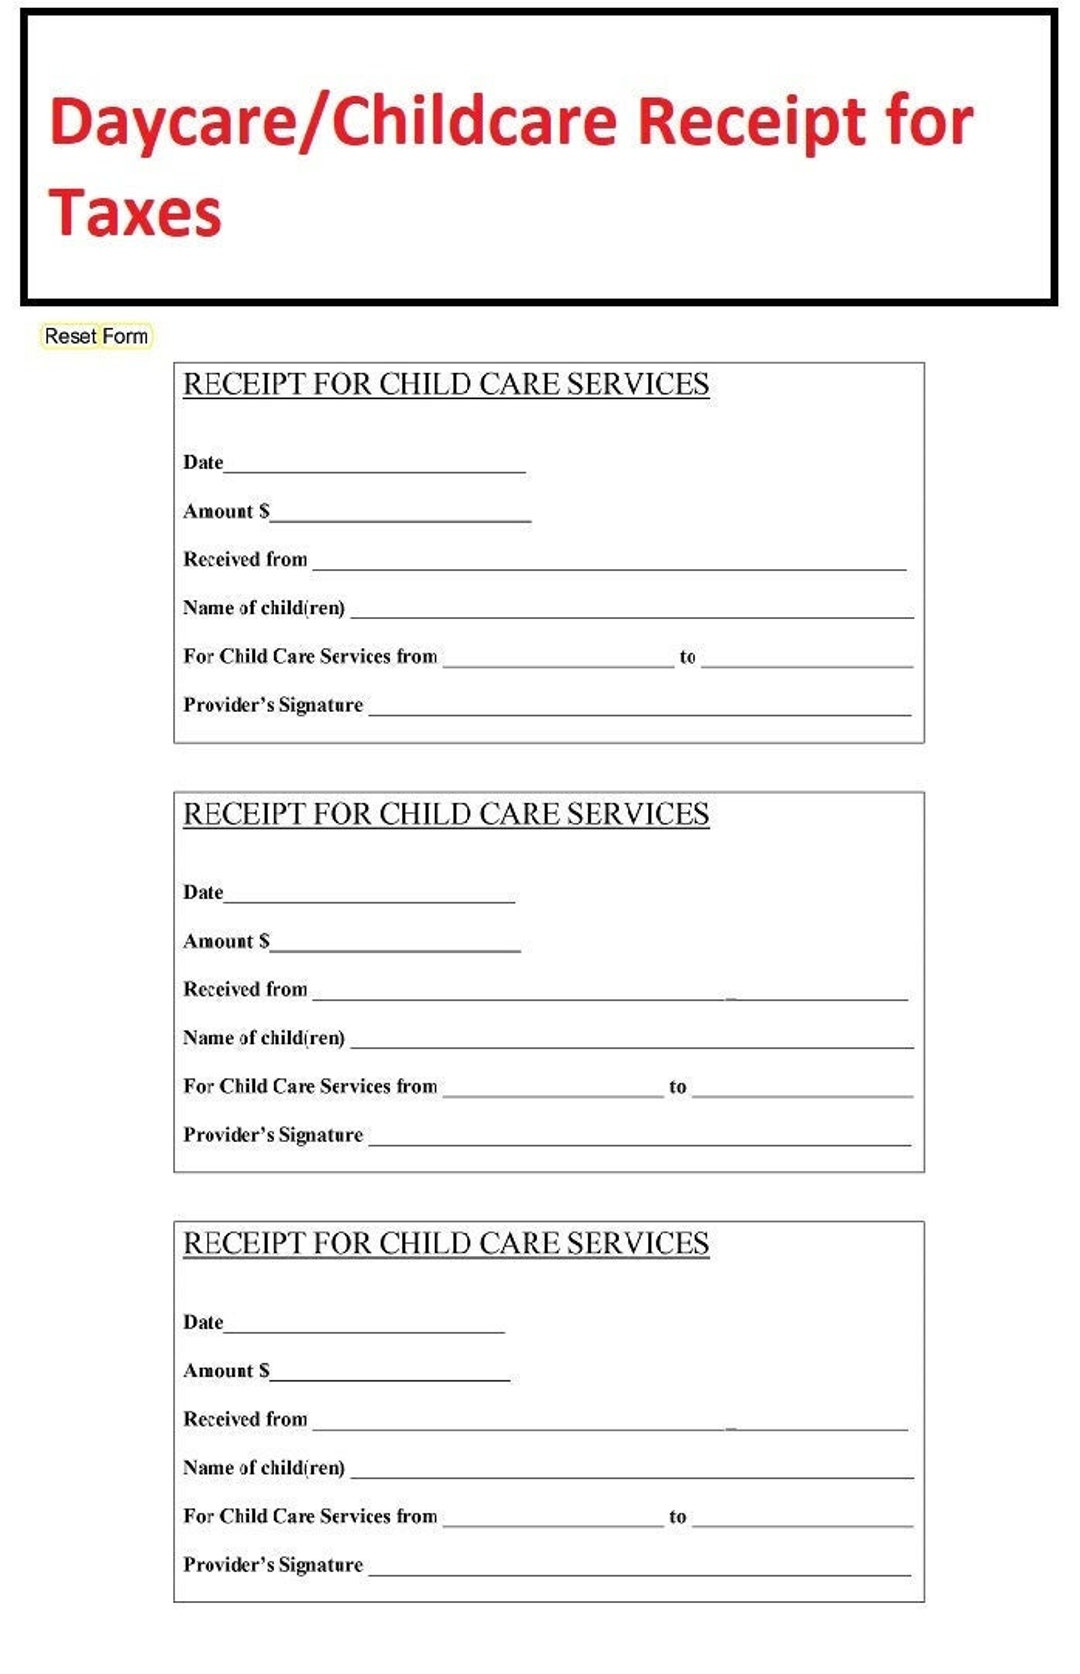 childcare-receipts-for-parents-taxes-daycare-receipts-for-parents-taxes-fillable-pdf-form